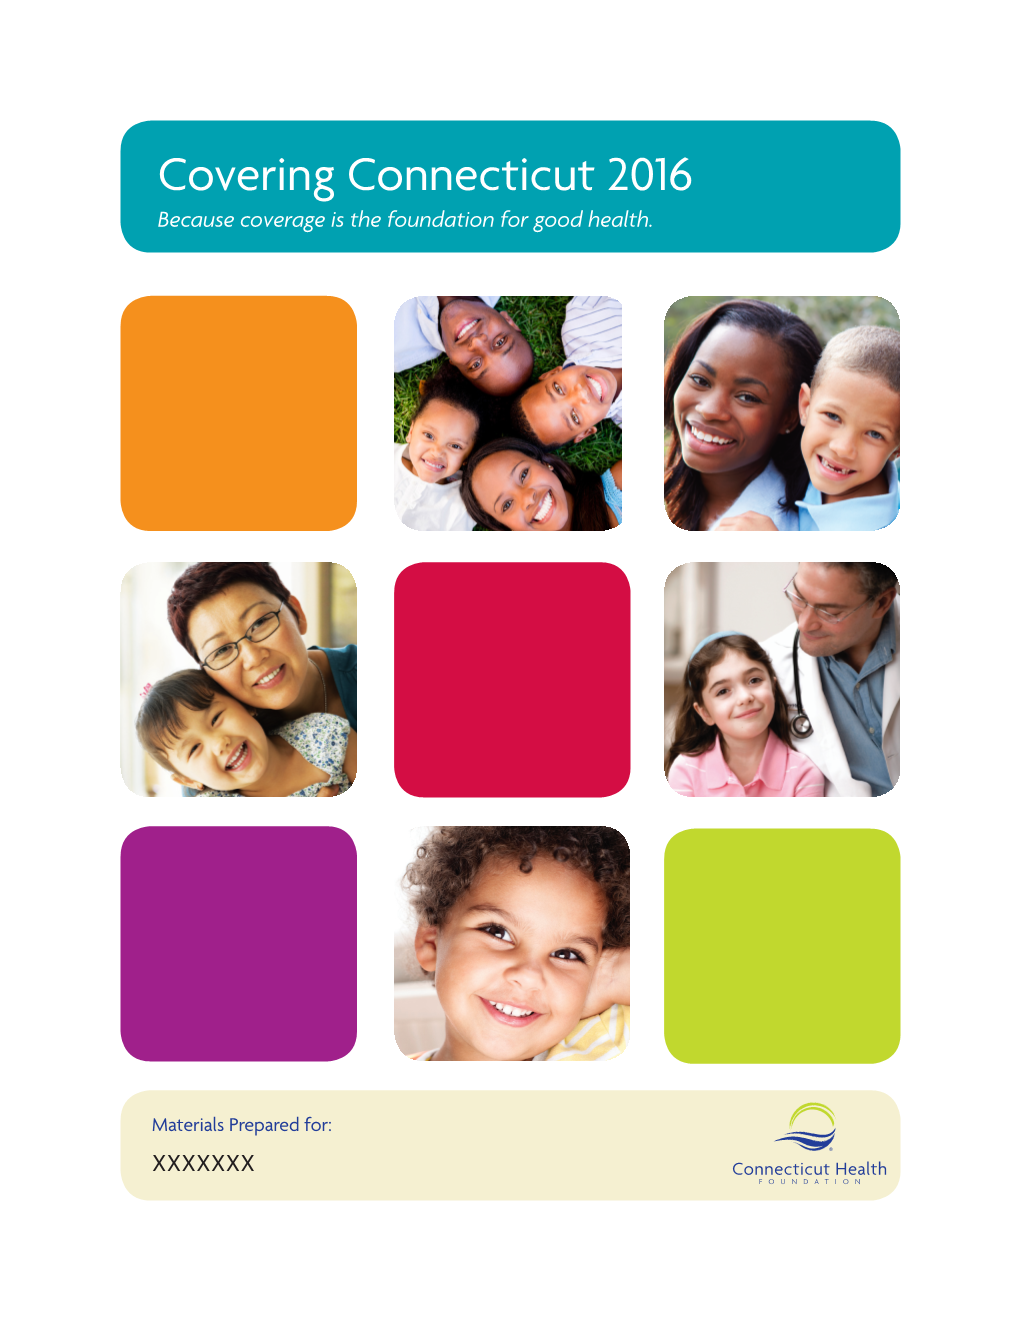 Covering Connecticut 2016 Because Coverage Is the Foundation for Good Health